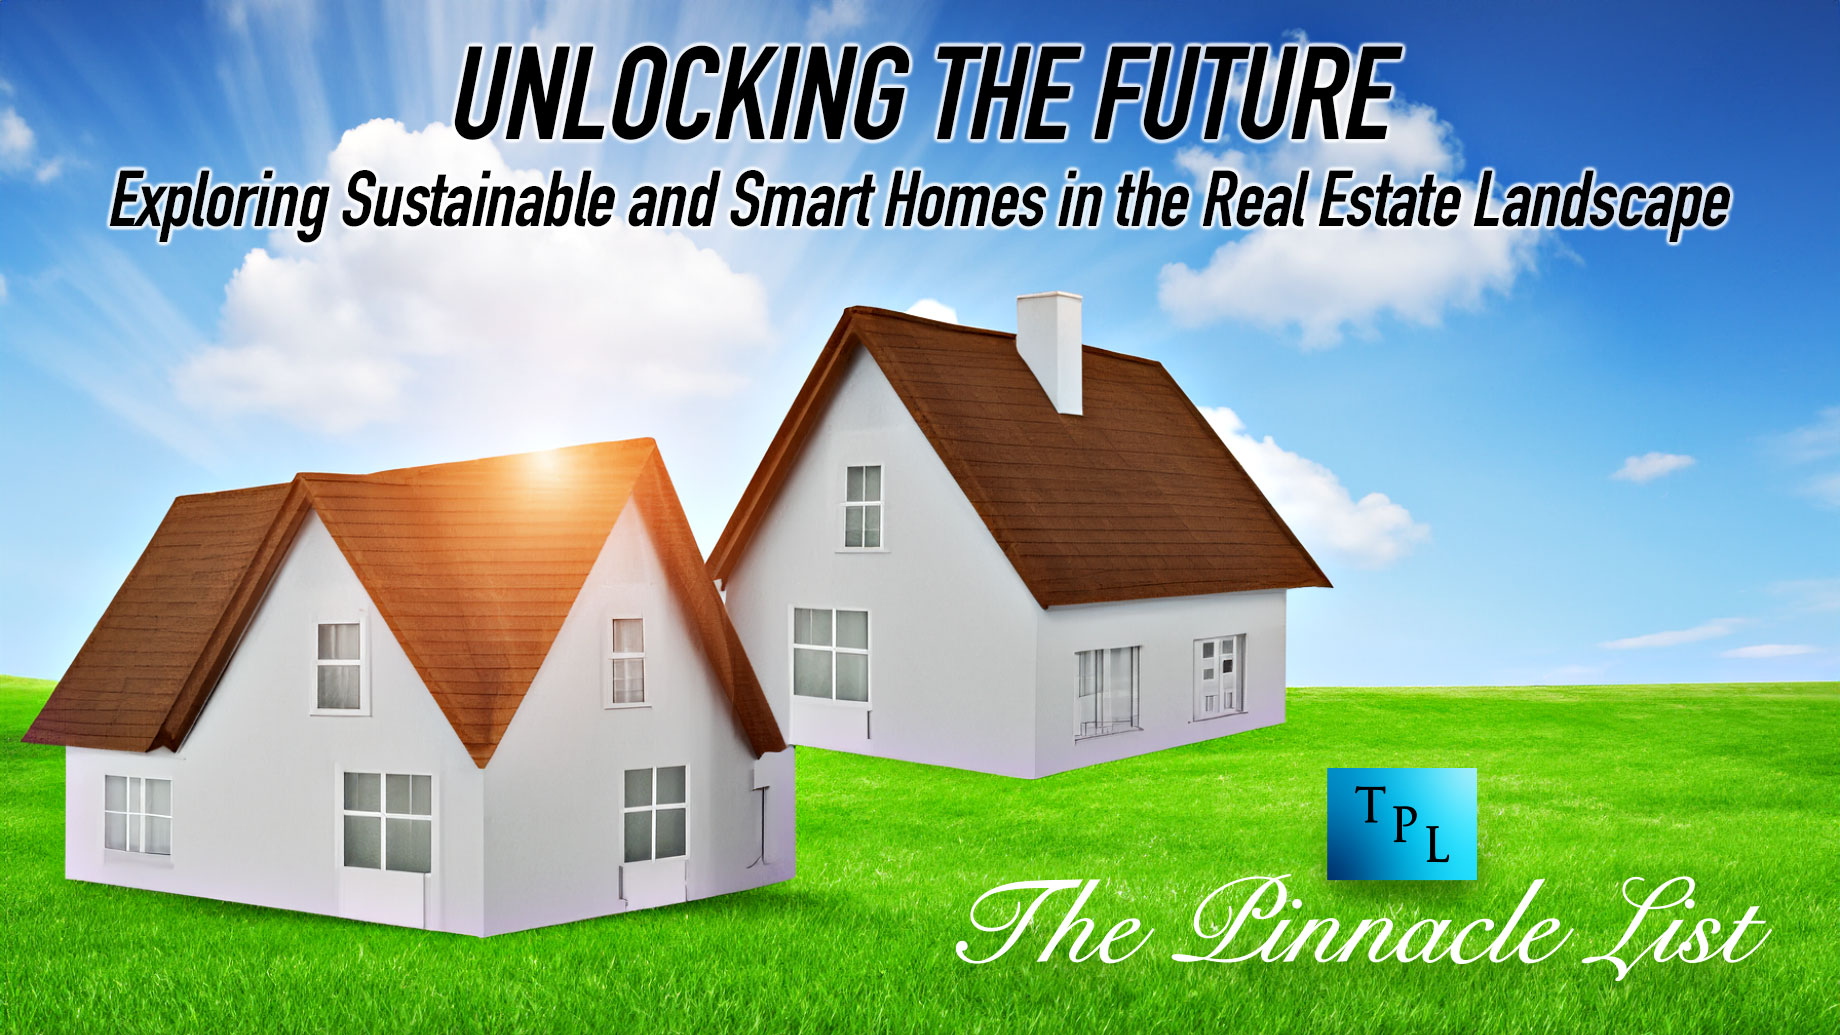 Unlocking the Future: Exploring Sustainable and Smart Homes in the Real Estate Landscape